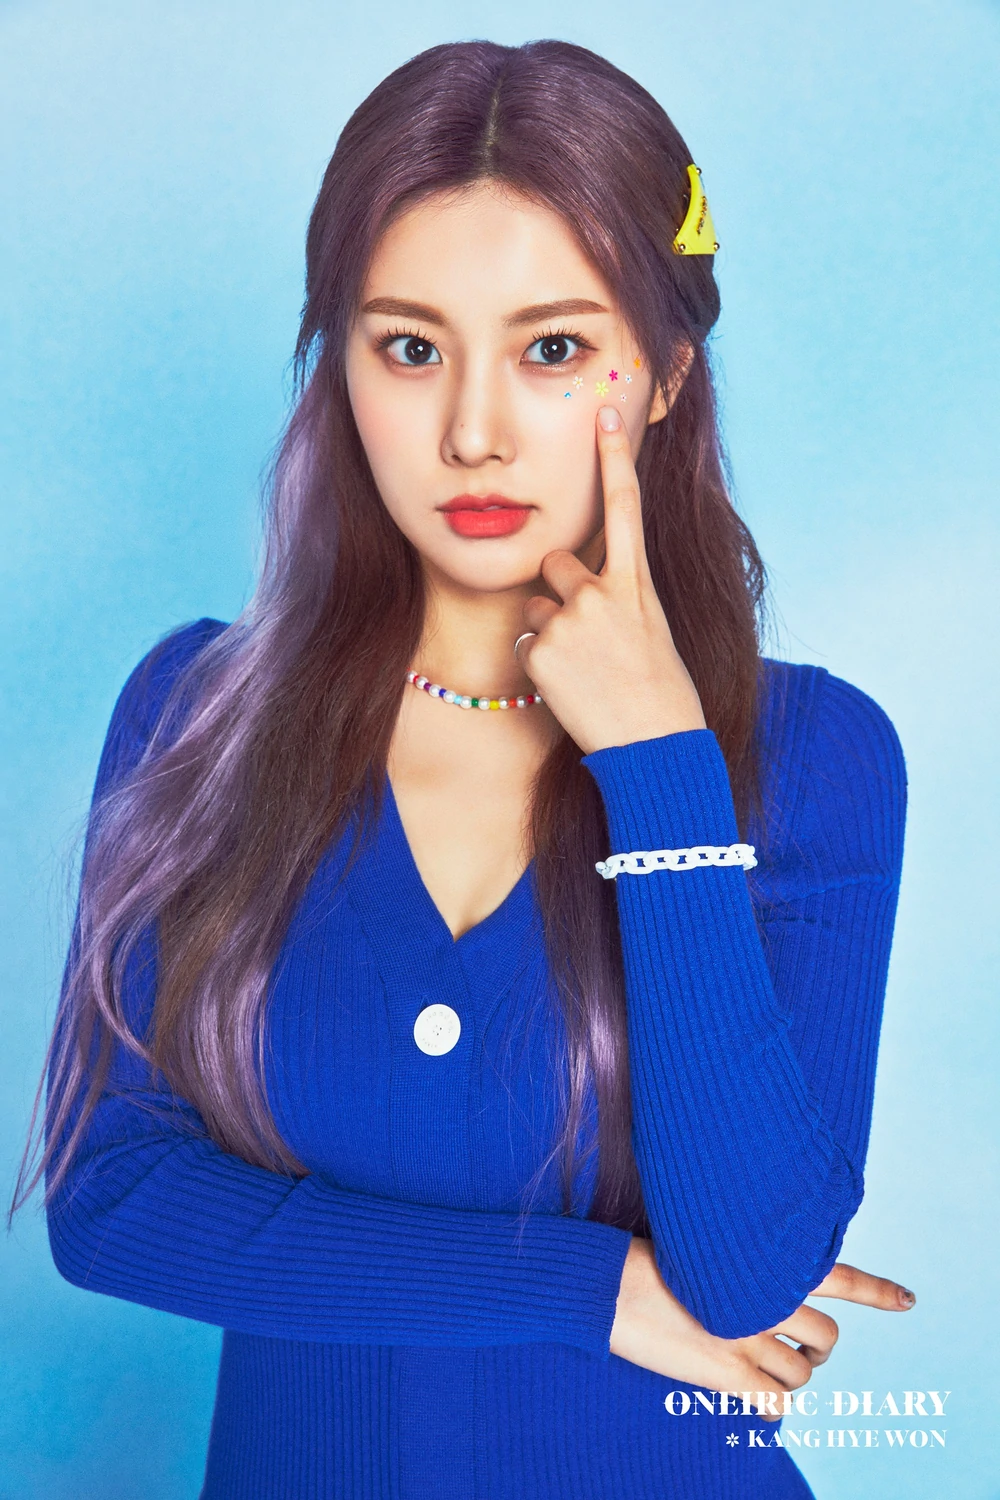 IZ*ONE Oneiric Diary Hyewon Concept Teaser Picture Image Photo Kpop K-Concept 2